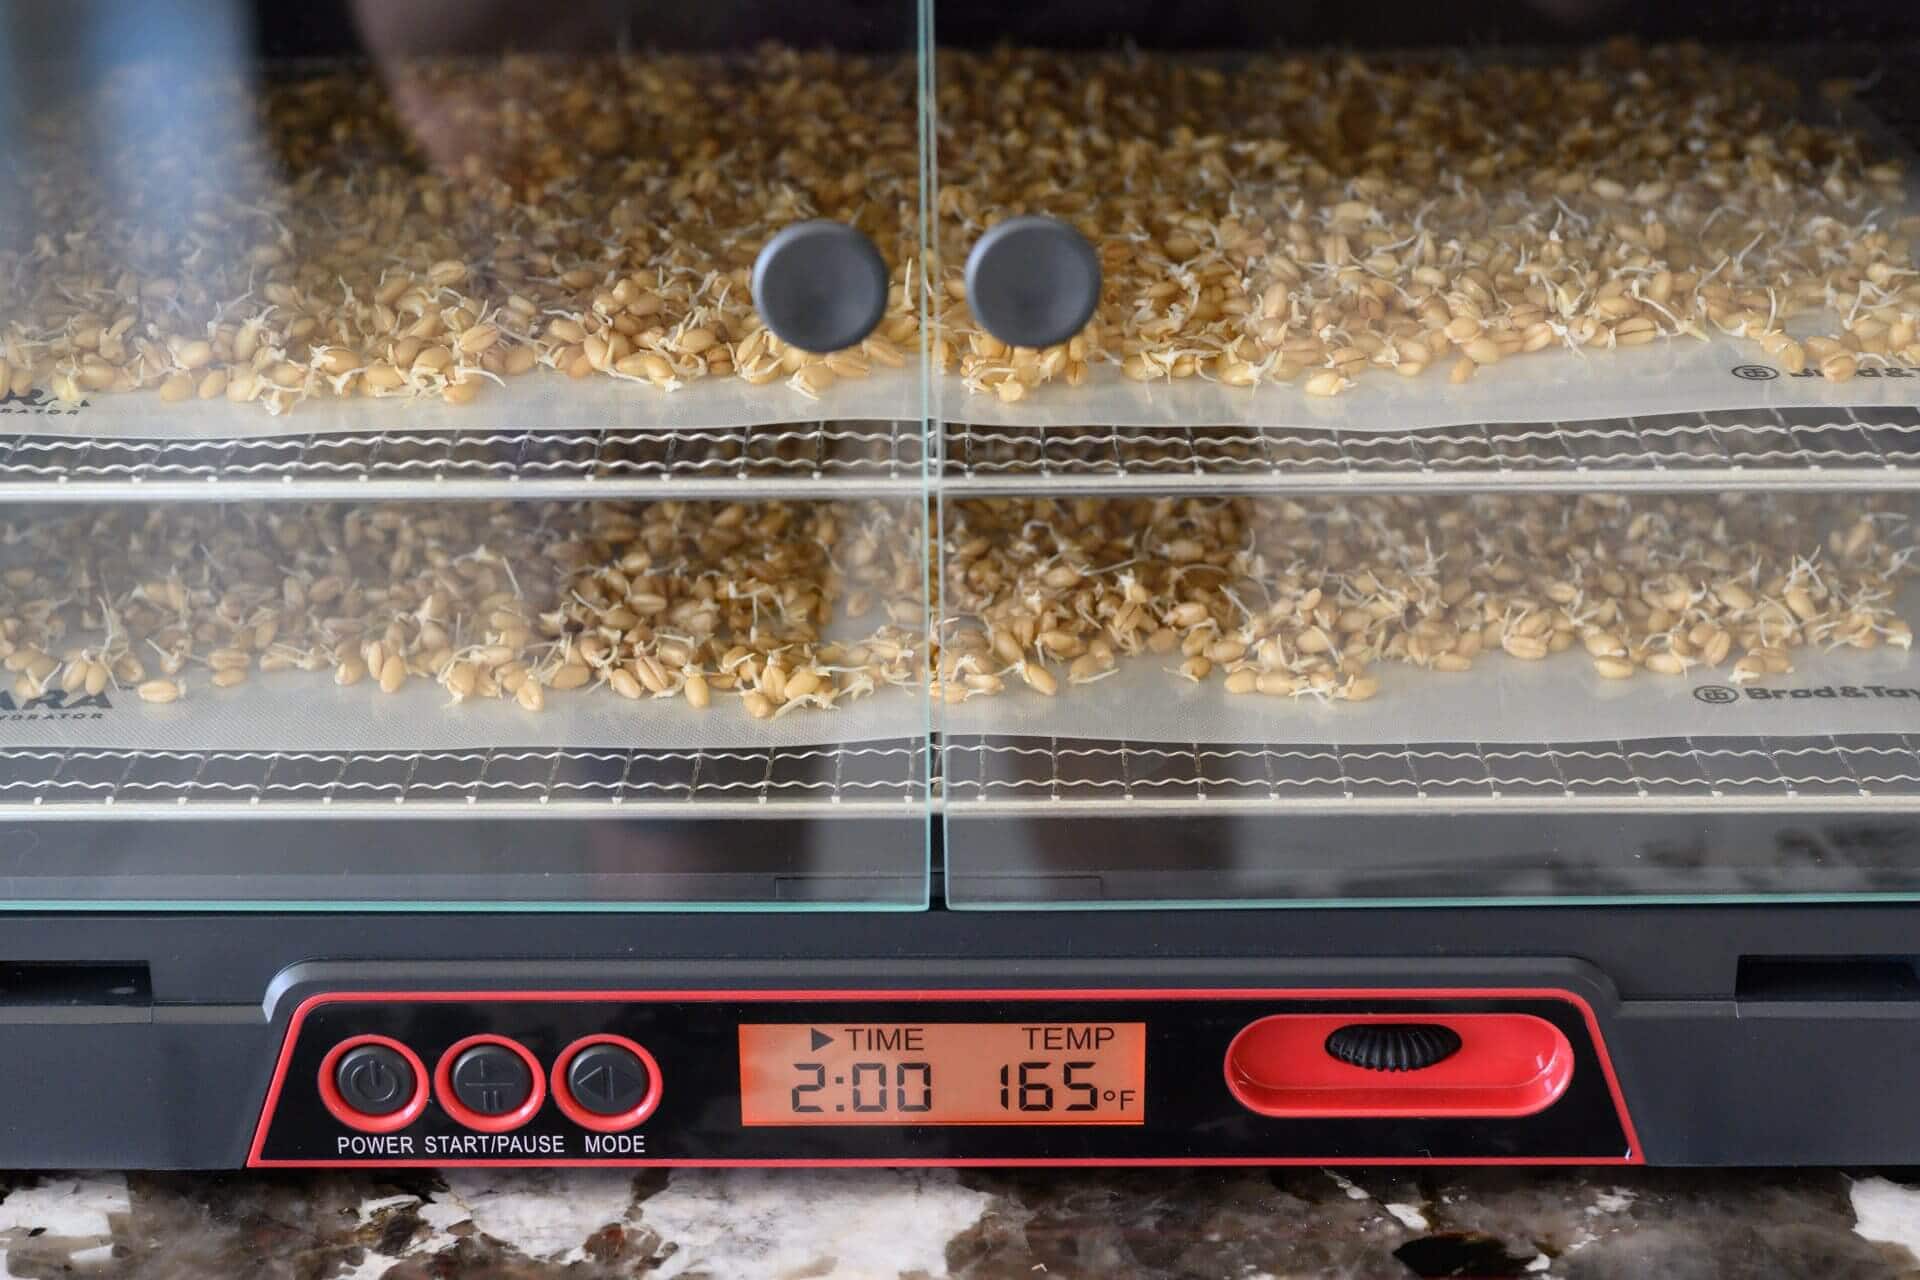 Dehydrating sprouted white wheat